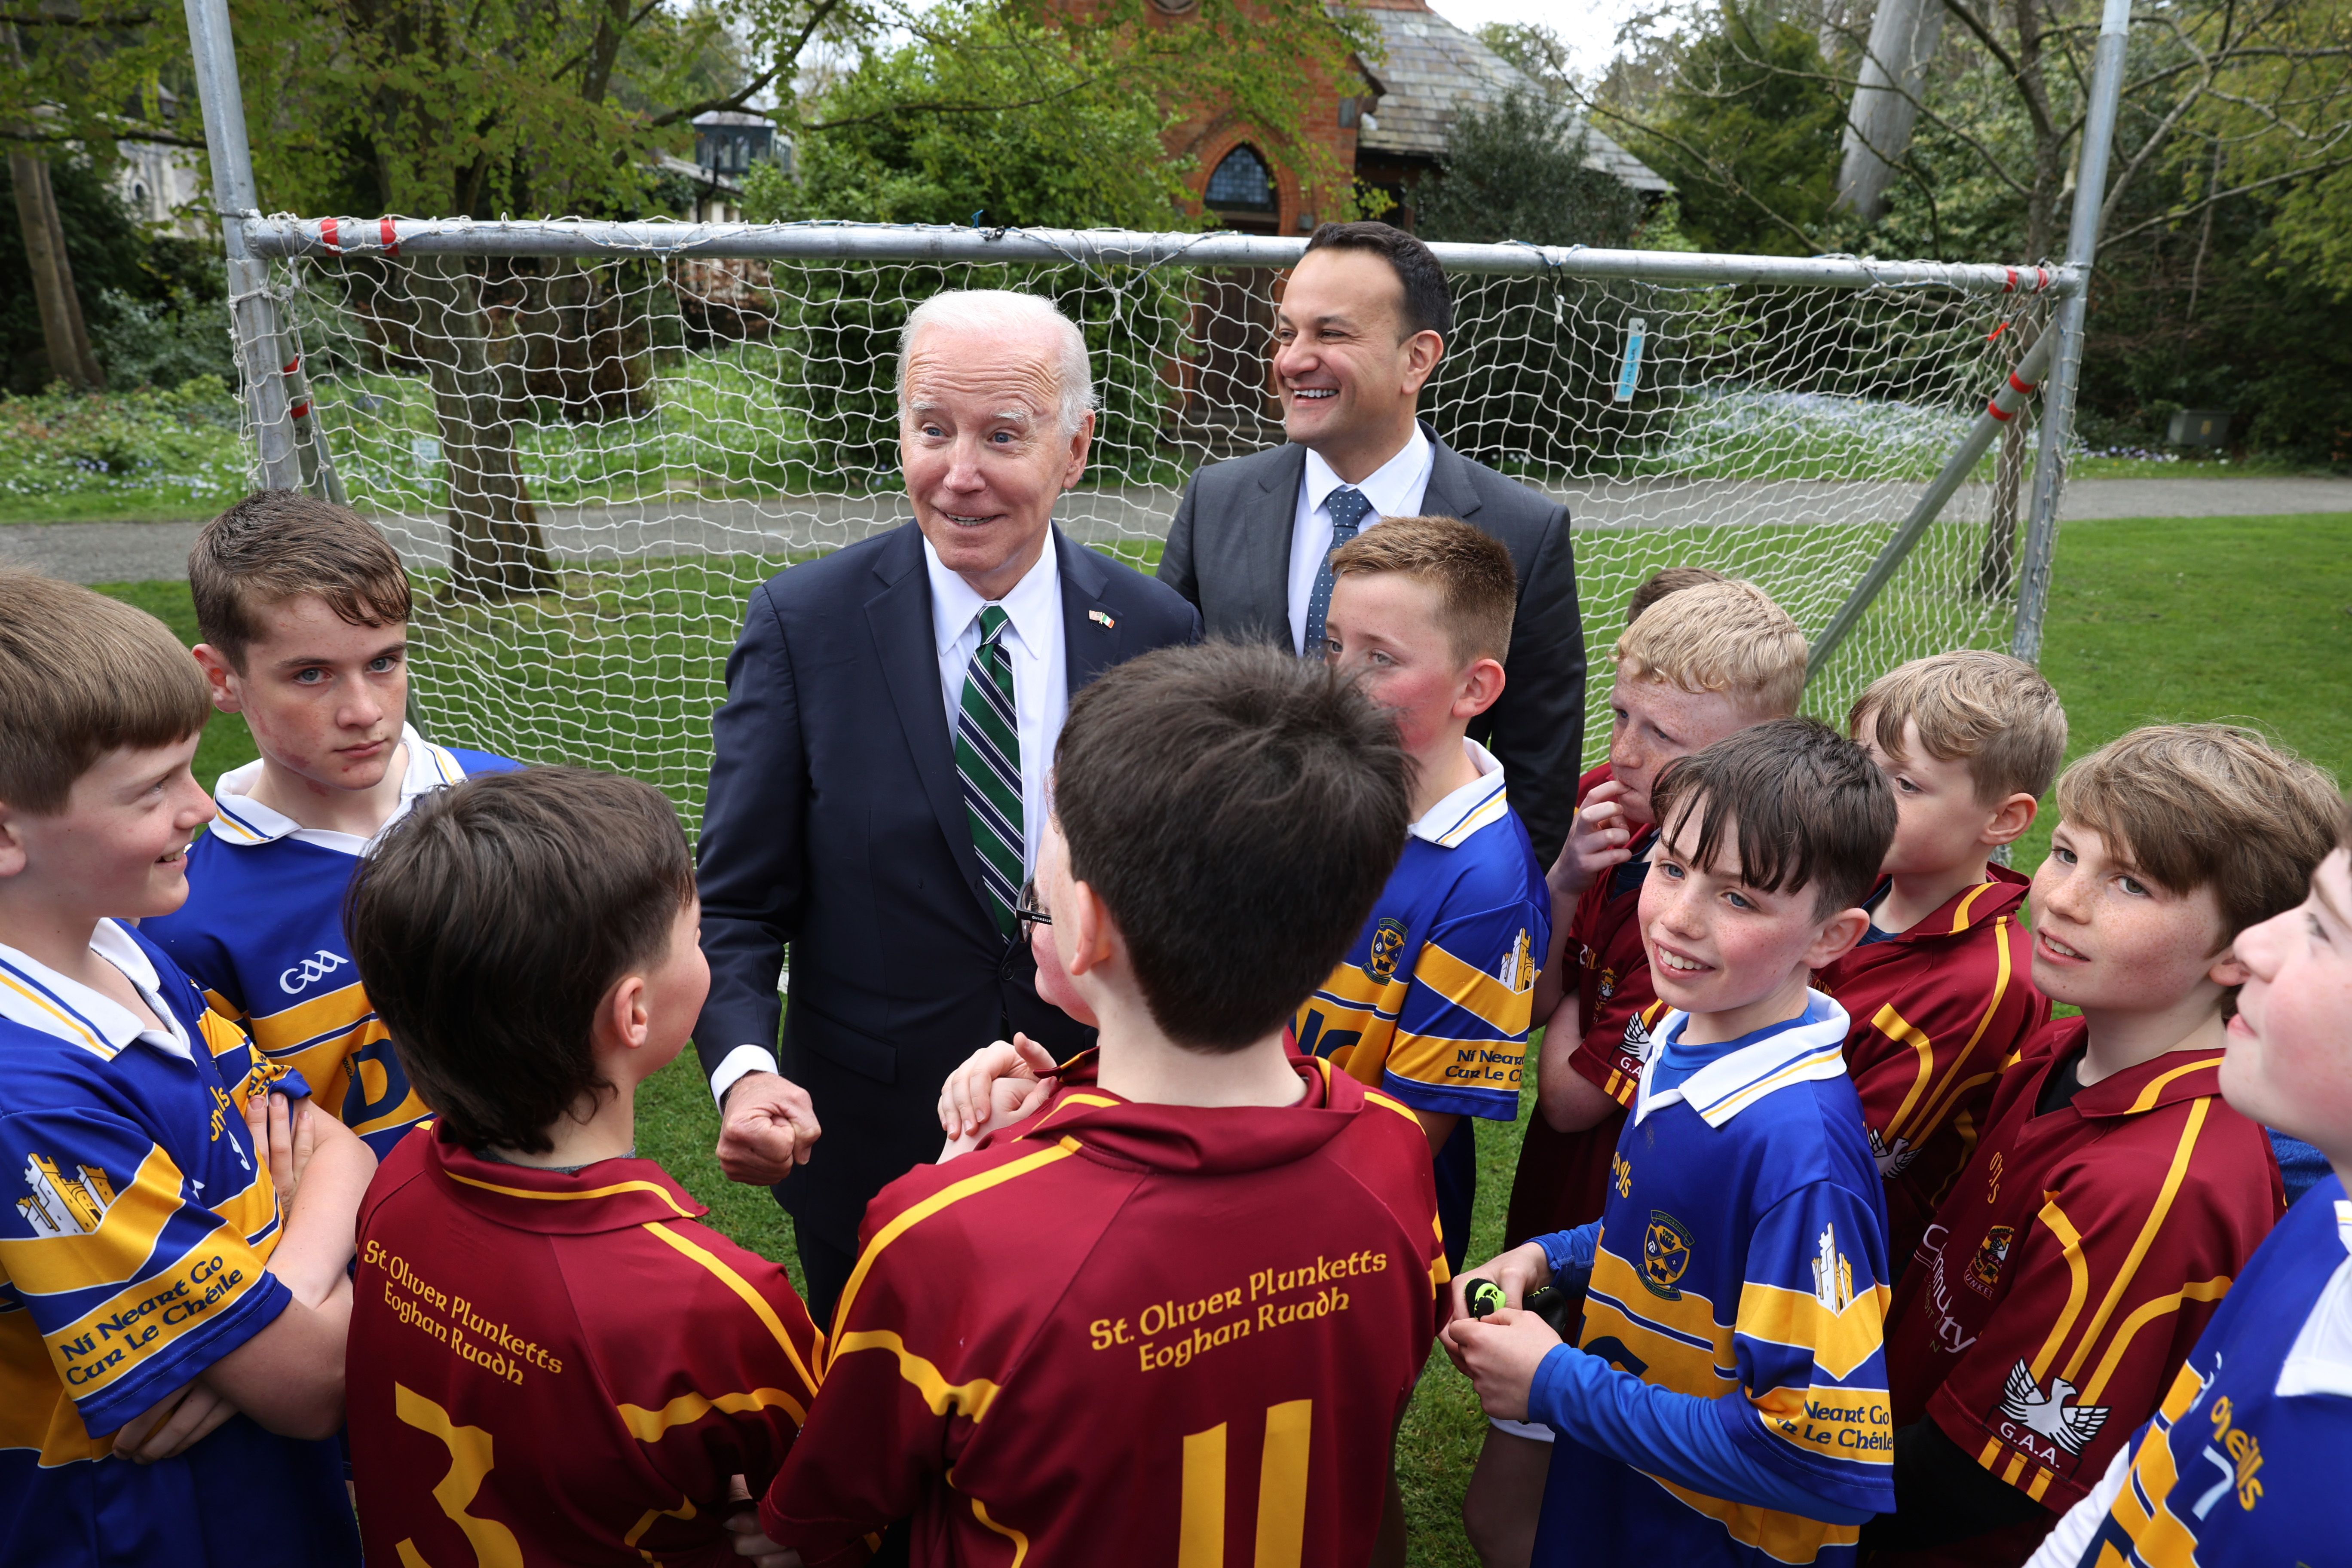 ANNIVERSARY: President Joe Biden was in Ireland this week to celebrate 25 years of the Good Friday Agreement